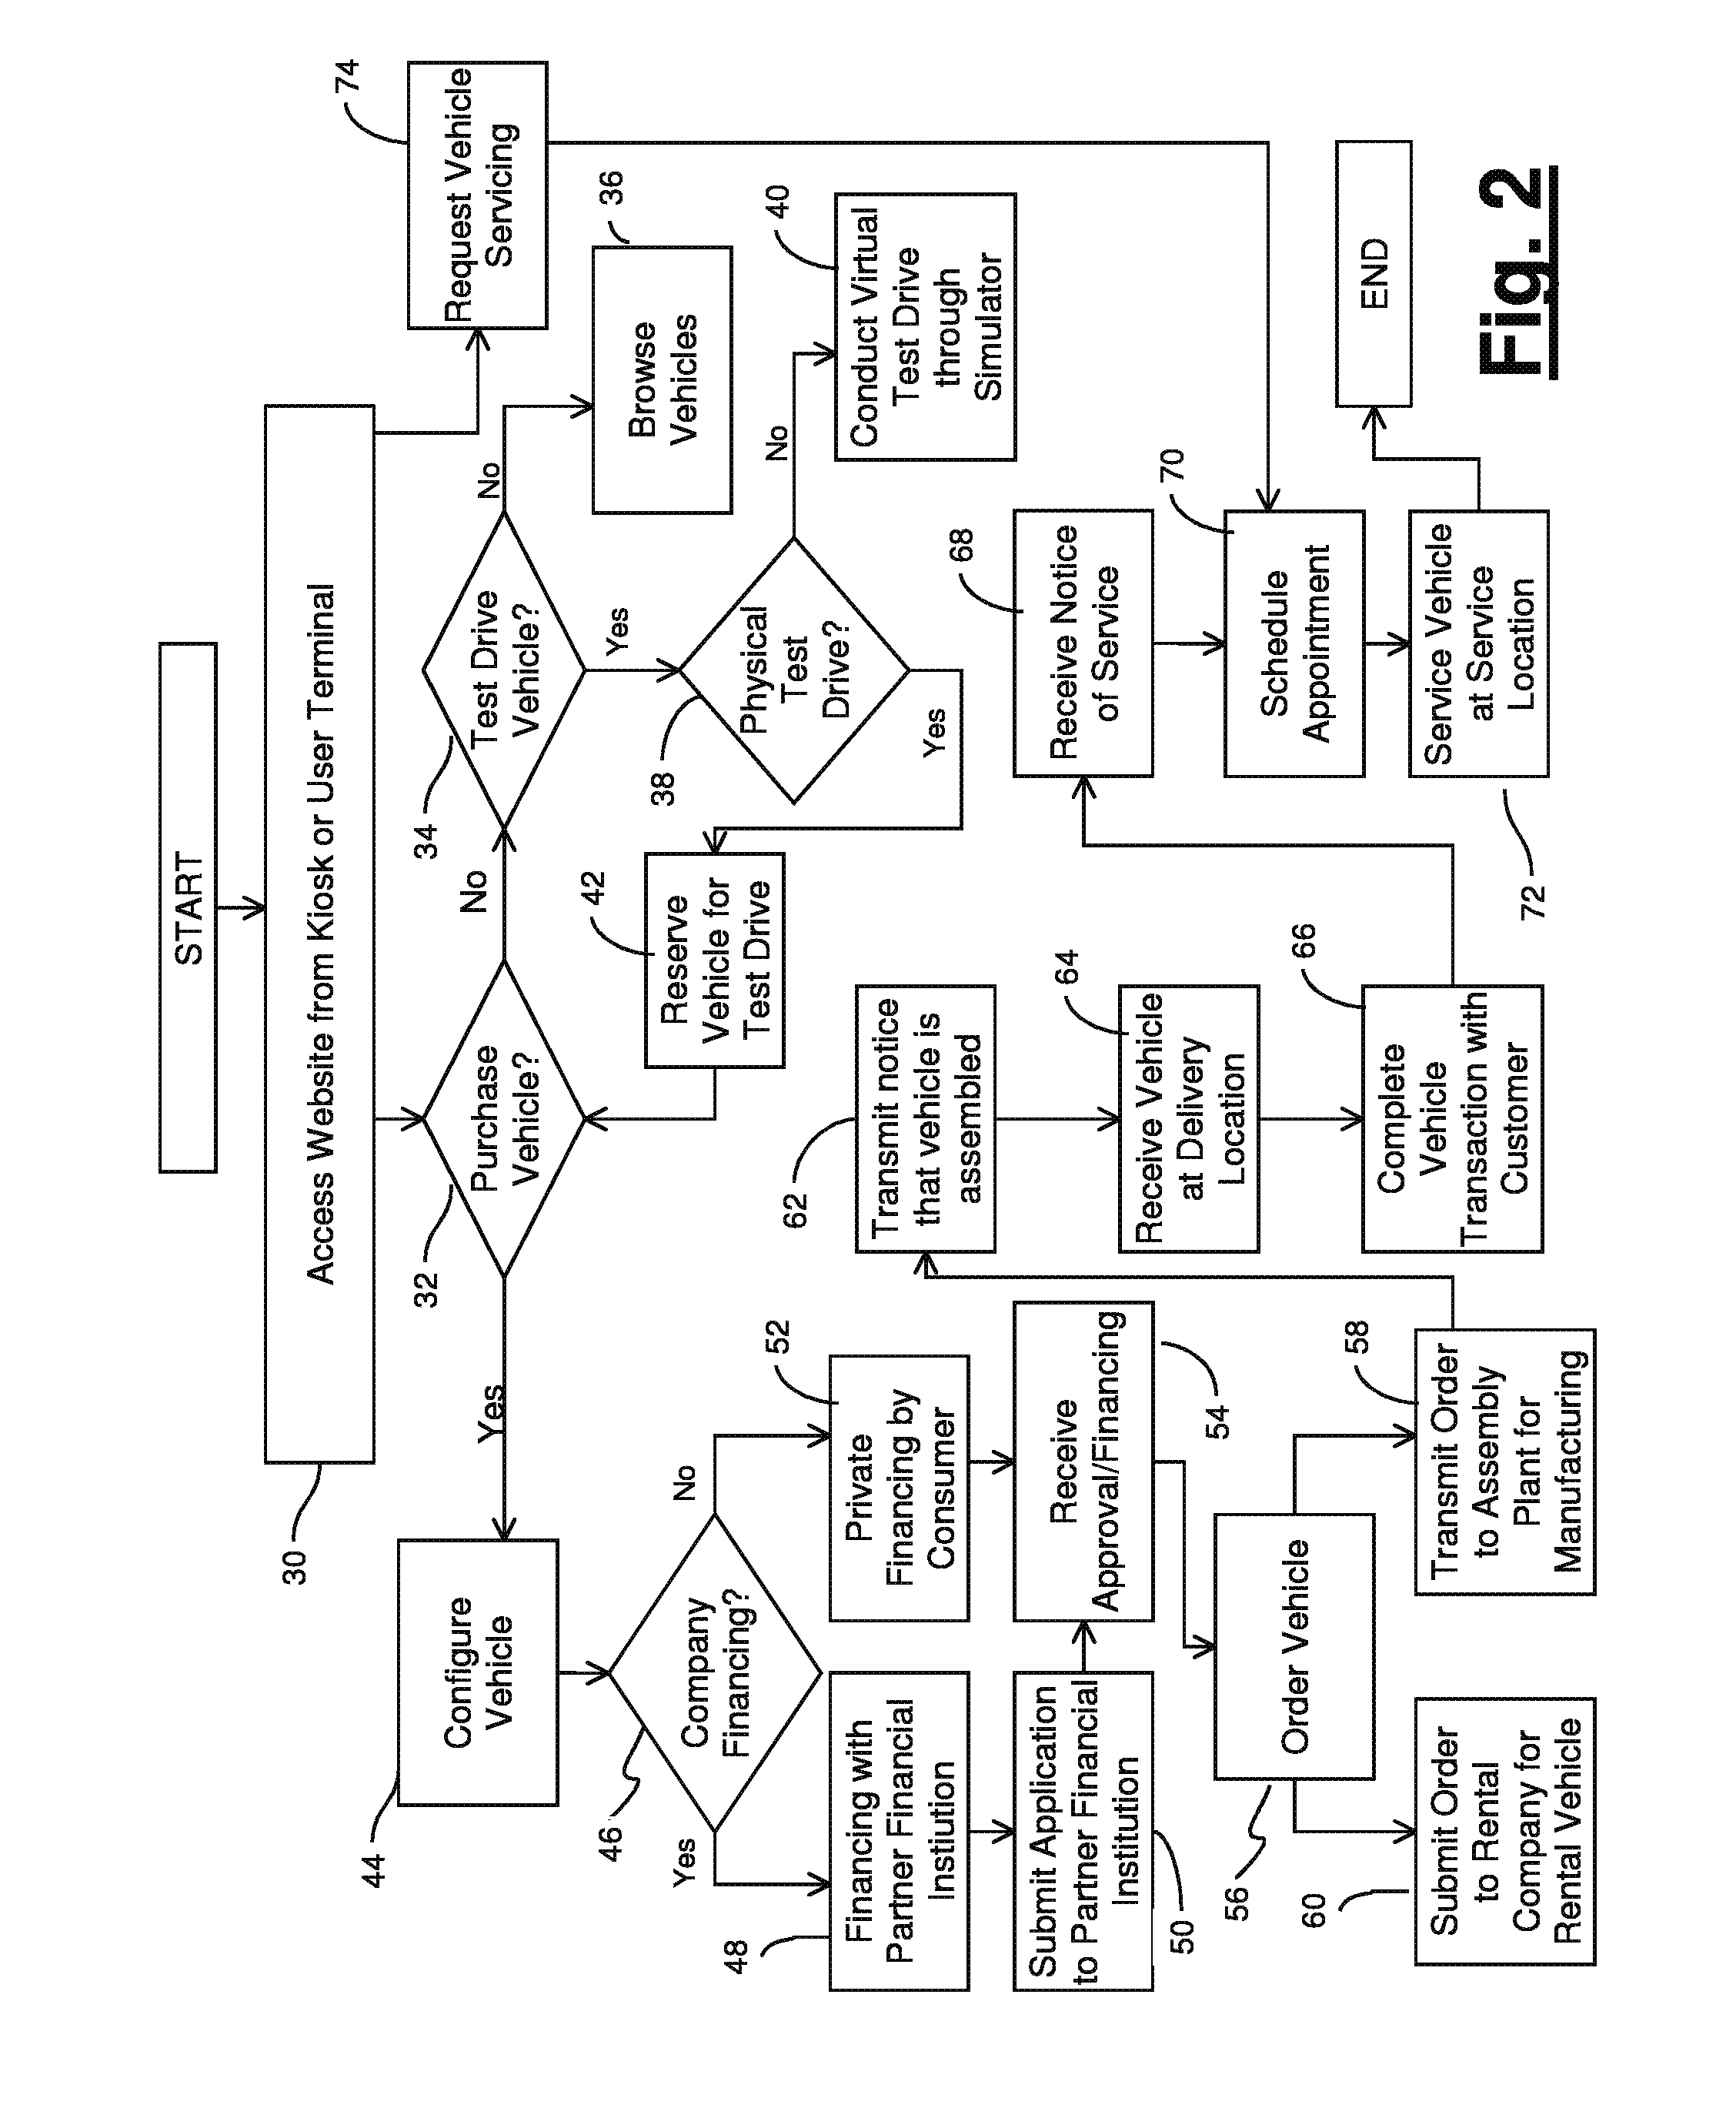 System and Method for Vehicle Retail Sales, Distribution, and Post-Sales Maintenance